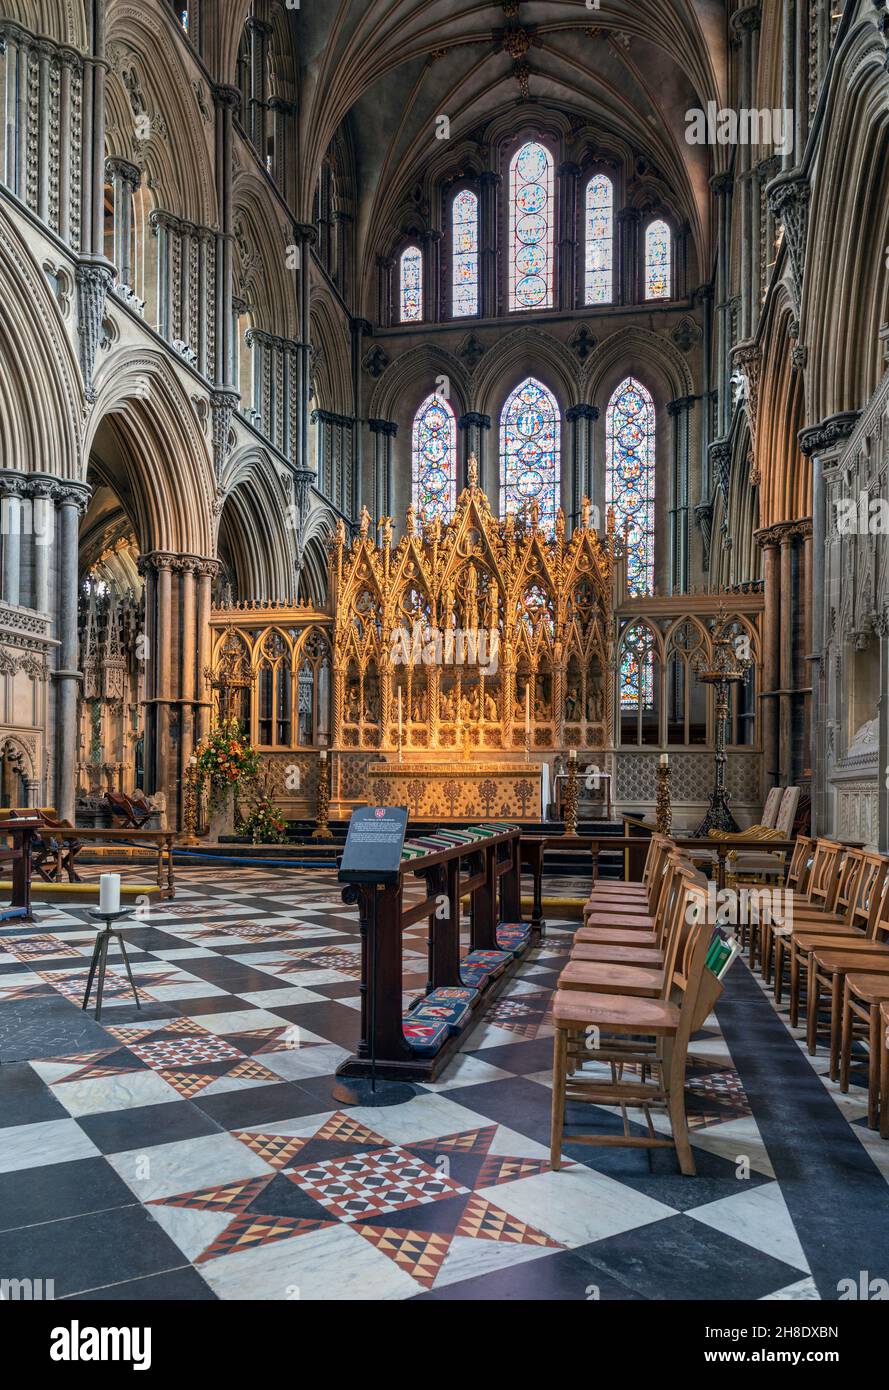 England, Cambridgeshire, Ely Cathedral, Interior showing Ornate Arches and Stone Screen near the Shrine of St Etheldreda Stock Photo